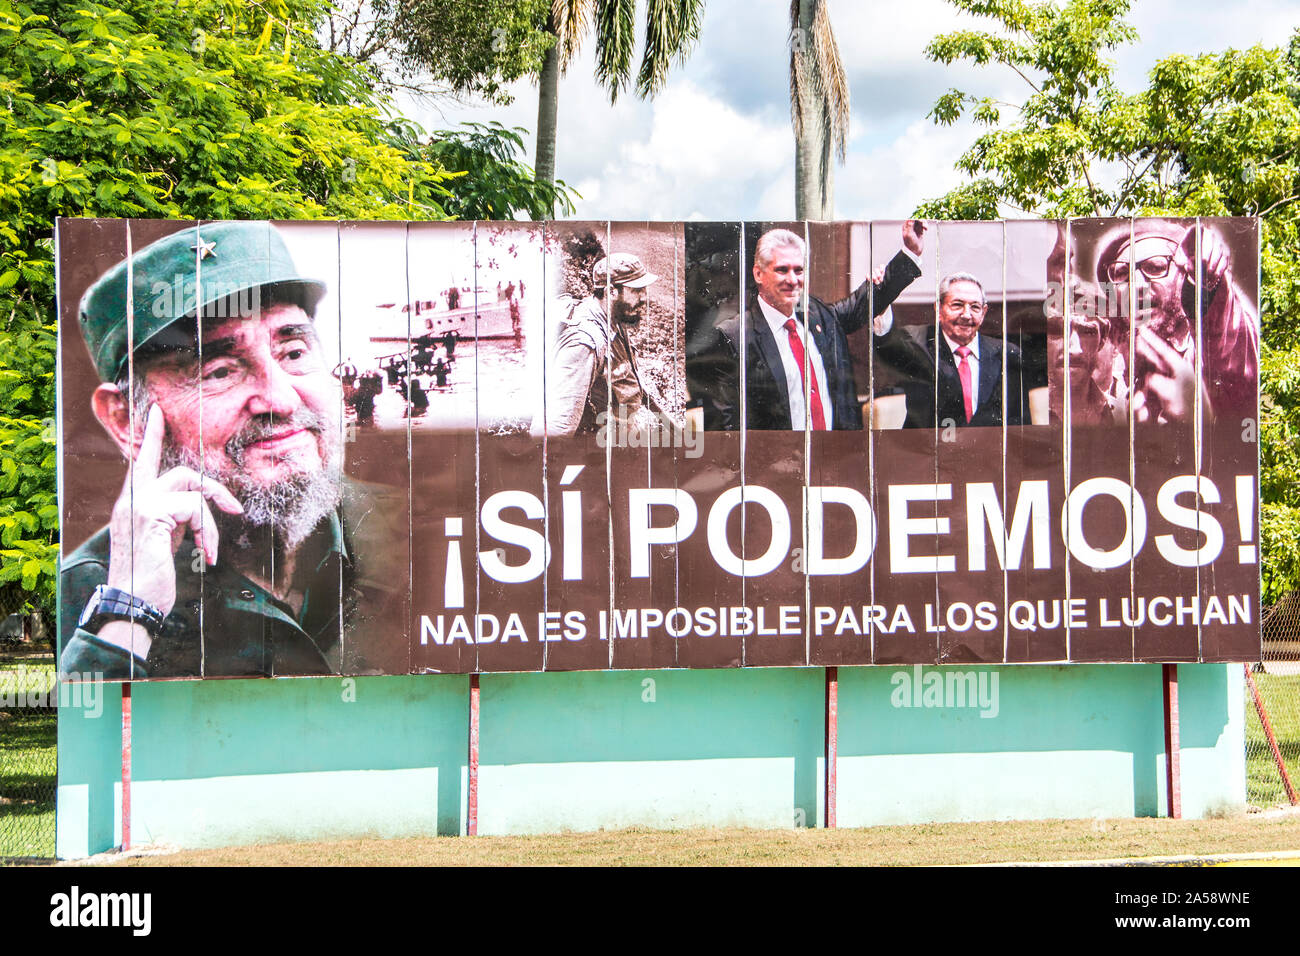 A propoganda billboard that translated in English means, 'Yes, we can. Nothing is impossible for those who struggle.' Camaguey, Cuba Stock Photo